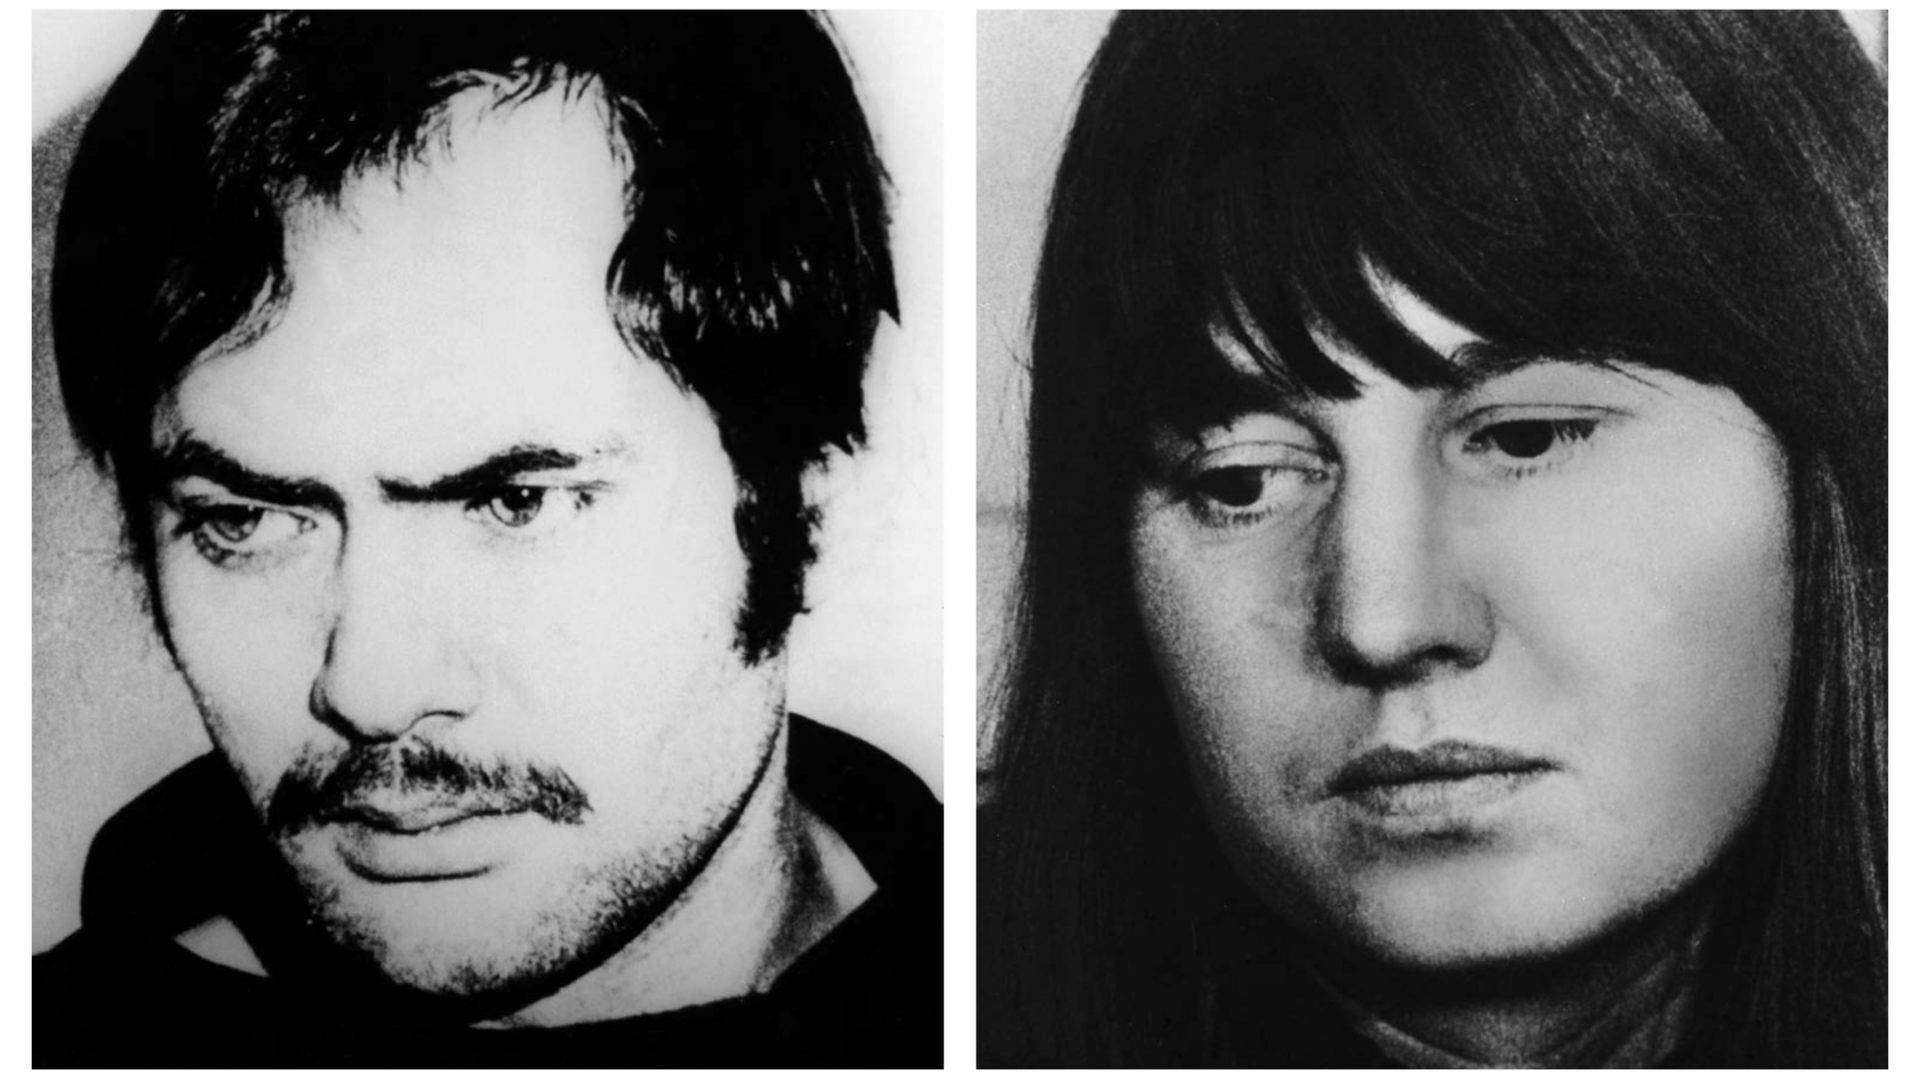 Andreas Baader and Ulrike Meinhof, founders of the Red Army Faction, or Baader-Meinhof group. Photos: Keystone-France/ullstein bild/AFP/Getty